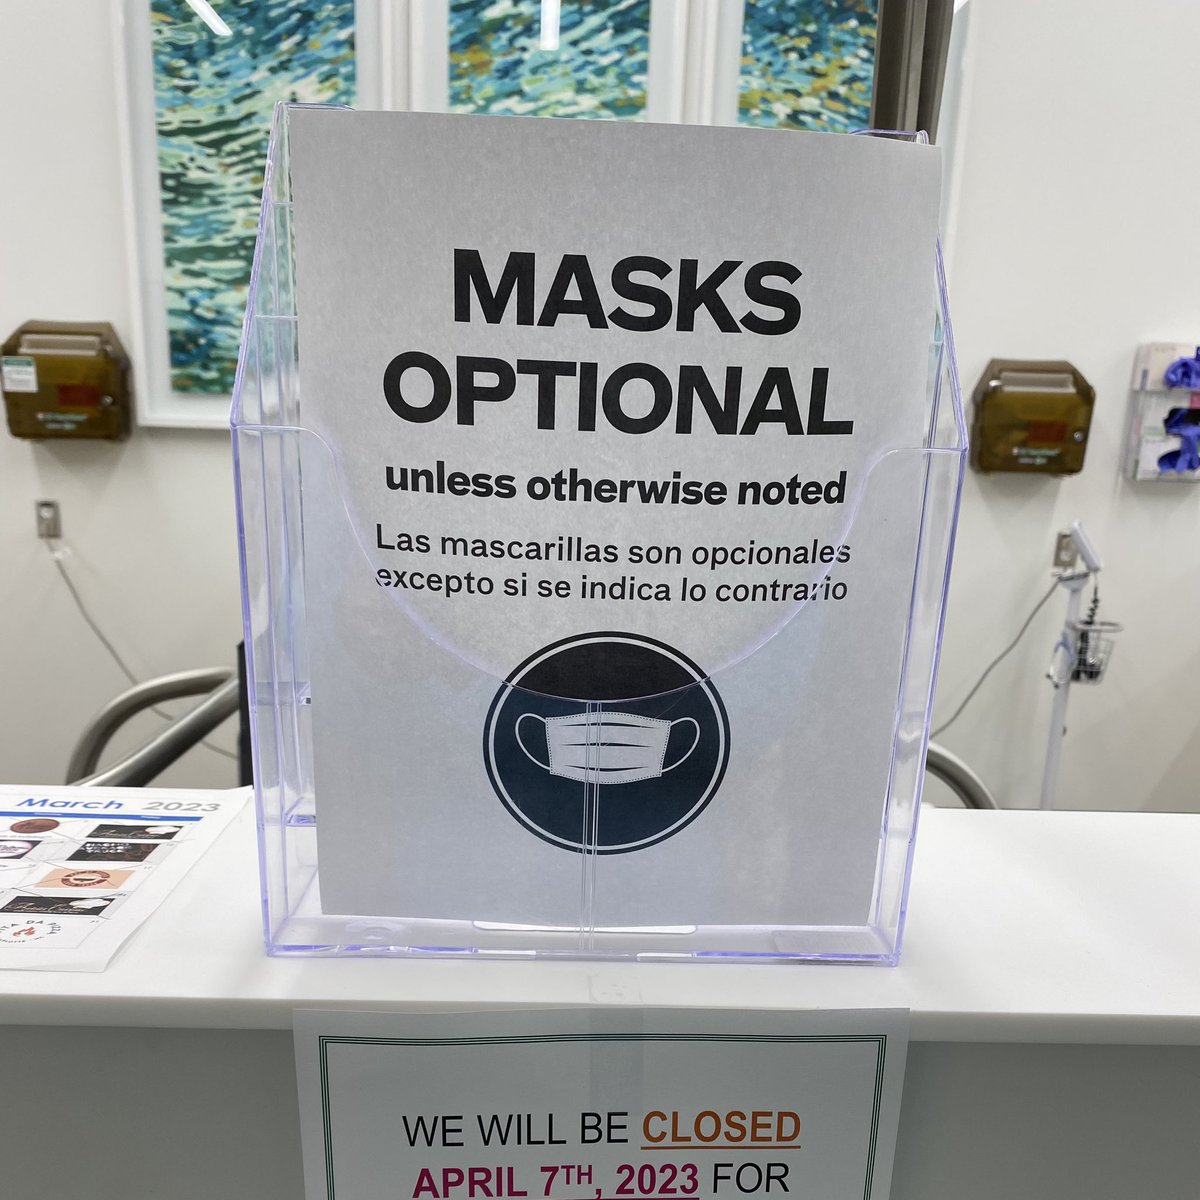 Masks are no longer required at @AtriumHealth #pulmonaryrehab. Staff told me if I didn’t like it, I could leave. They claimed no one dies of covid anymore, that it’s “just a cold” and that masks “don’t work.” These were pulmonary therapists! Most of their patients are on oxygen.